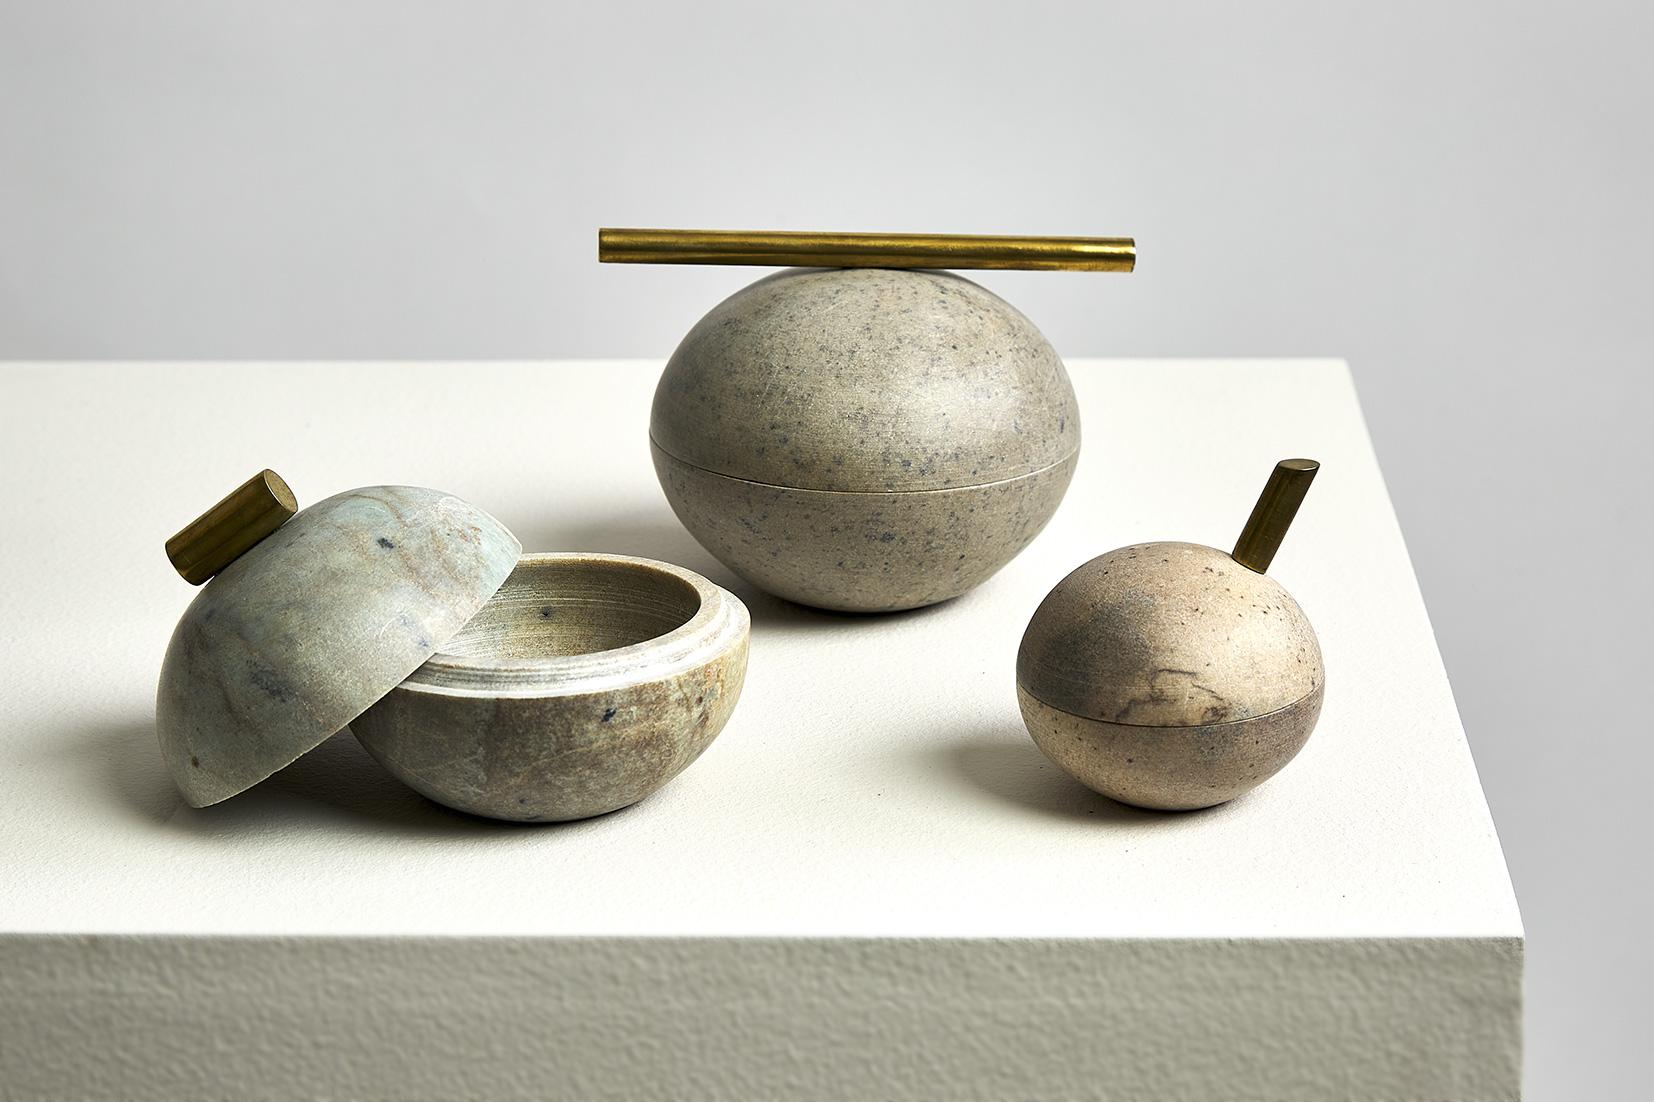 Form and materiality take center stage in these hand-sculpted pots. Bola sabão are small soapstone pots decorated with brass details featuring a rounded shape and fluid color patterns reminiscent of floating soap bubbles. These delicate pots are not